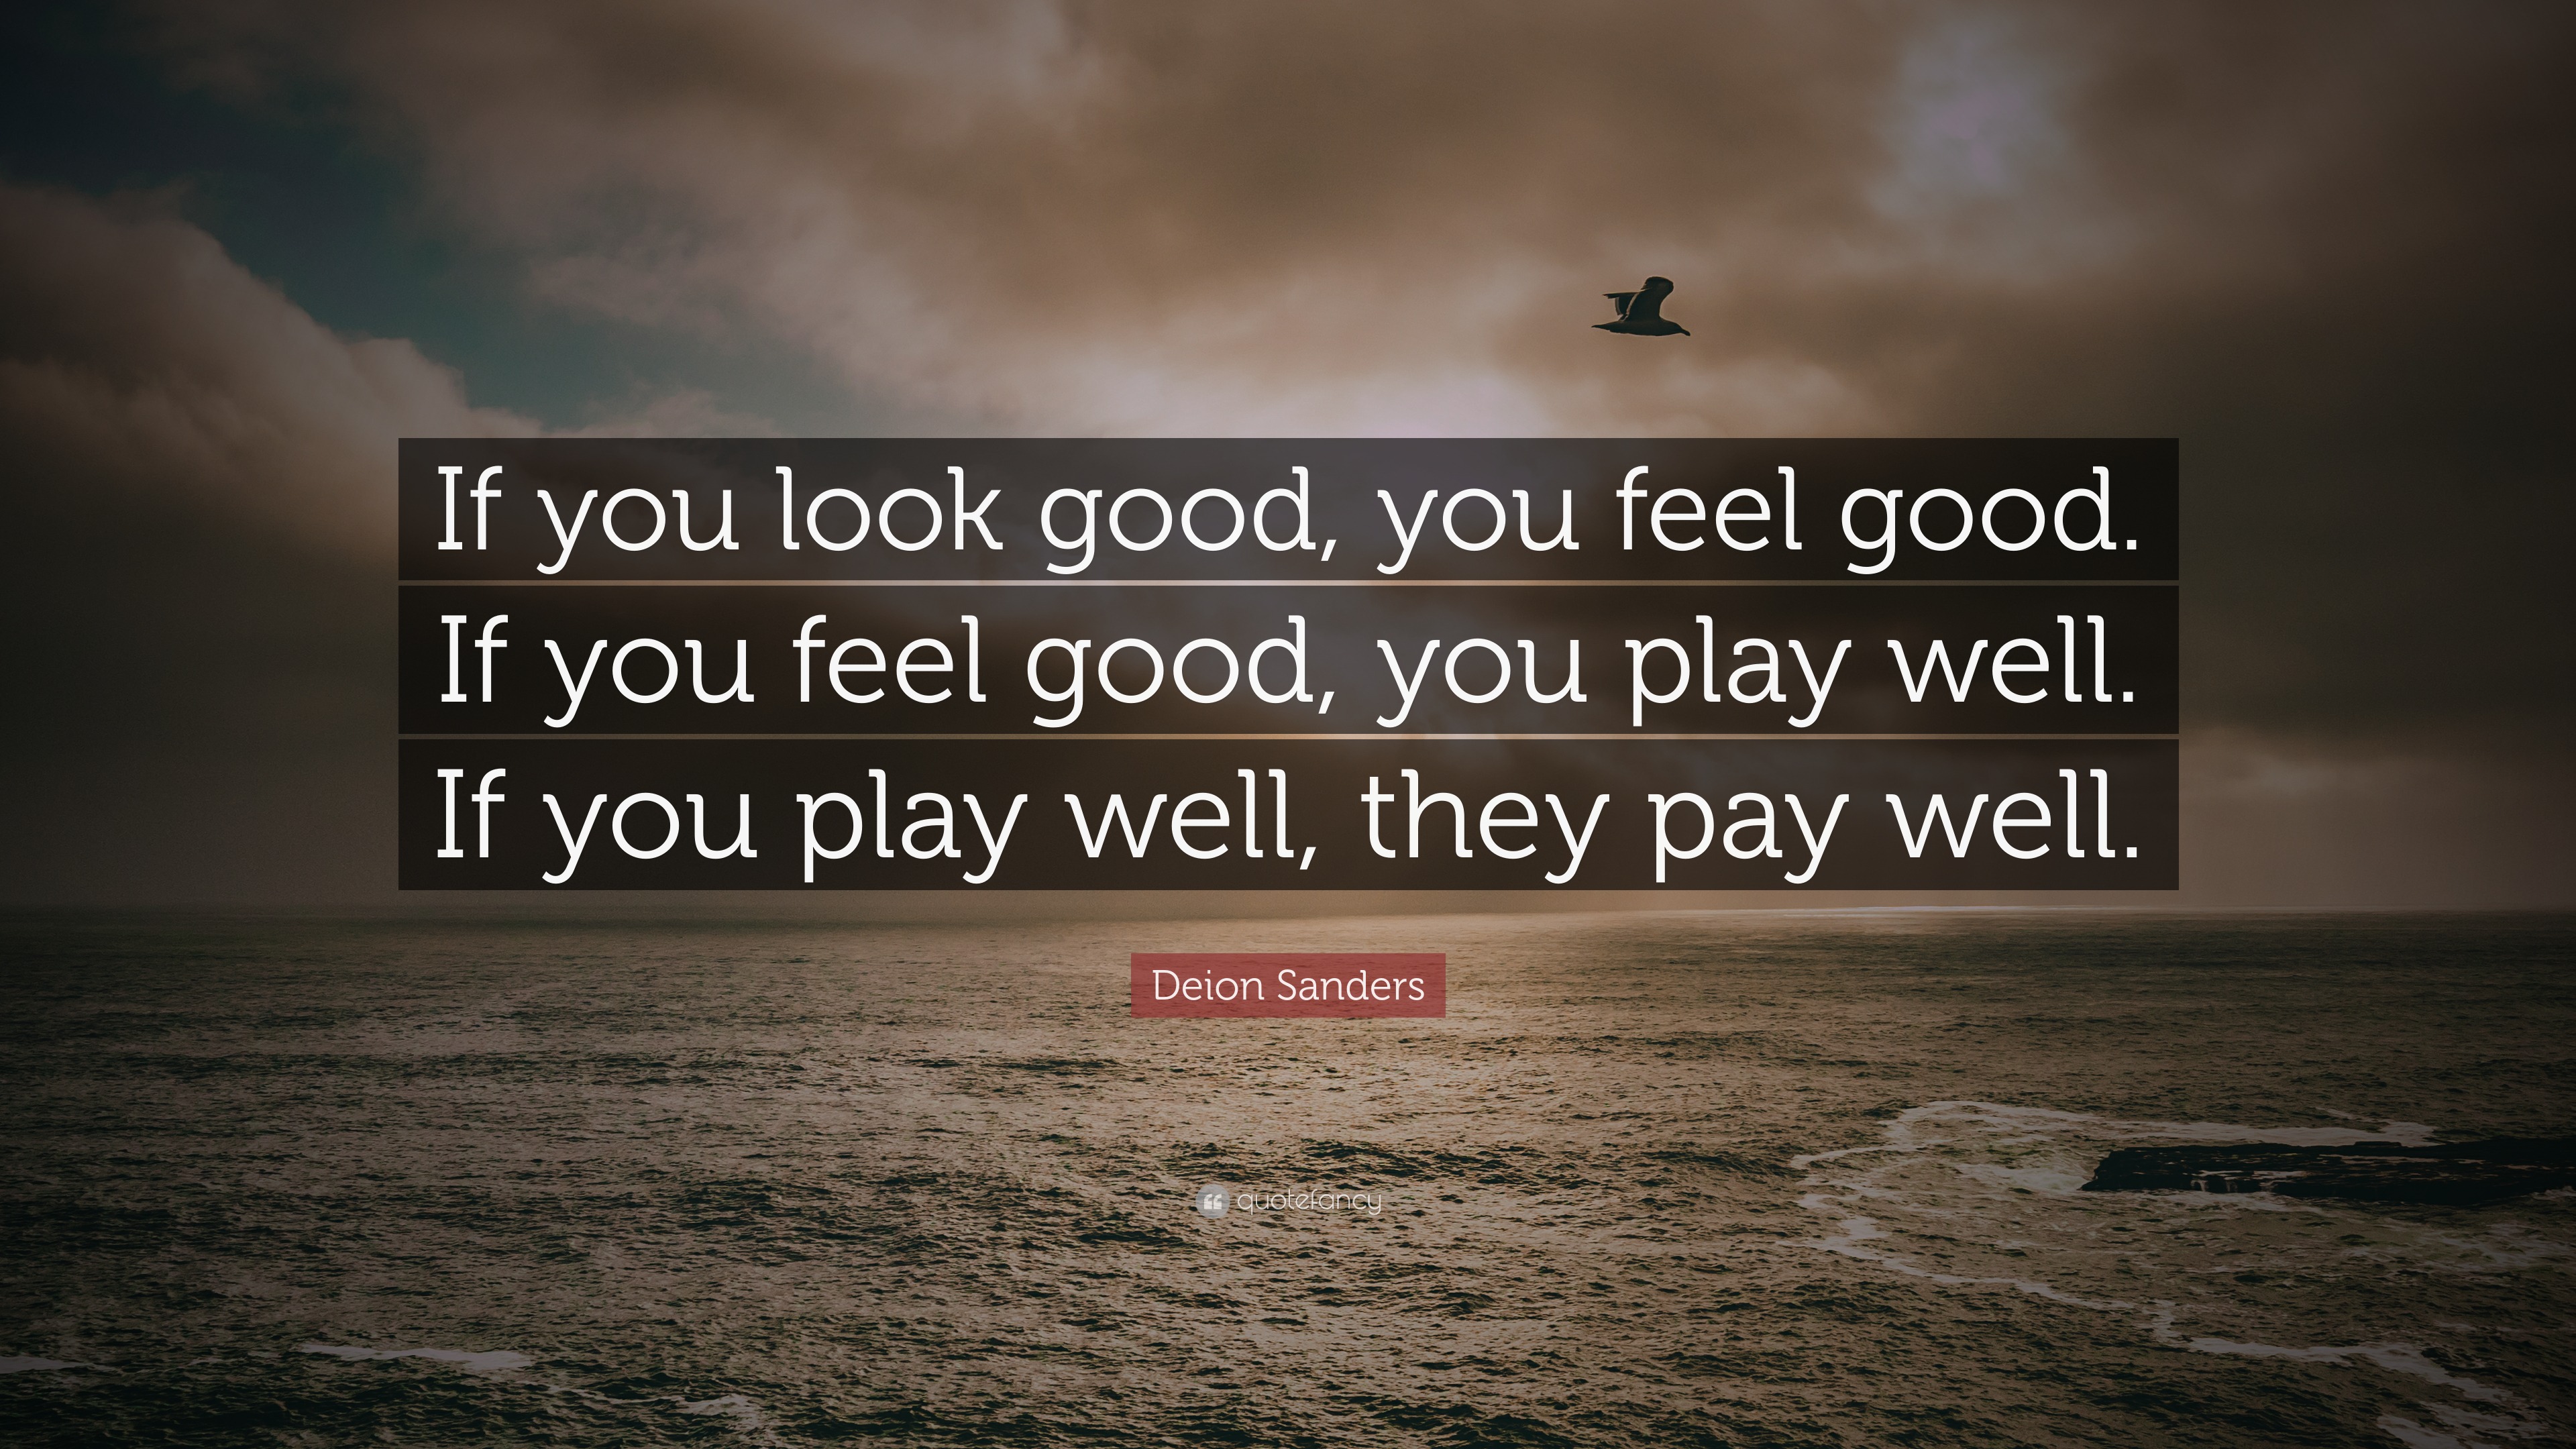 Deion Sanders quote: If you look good, you feel good, If you feel